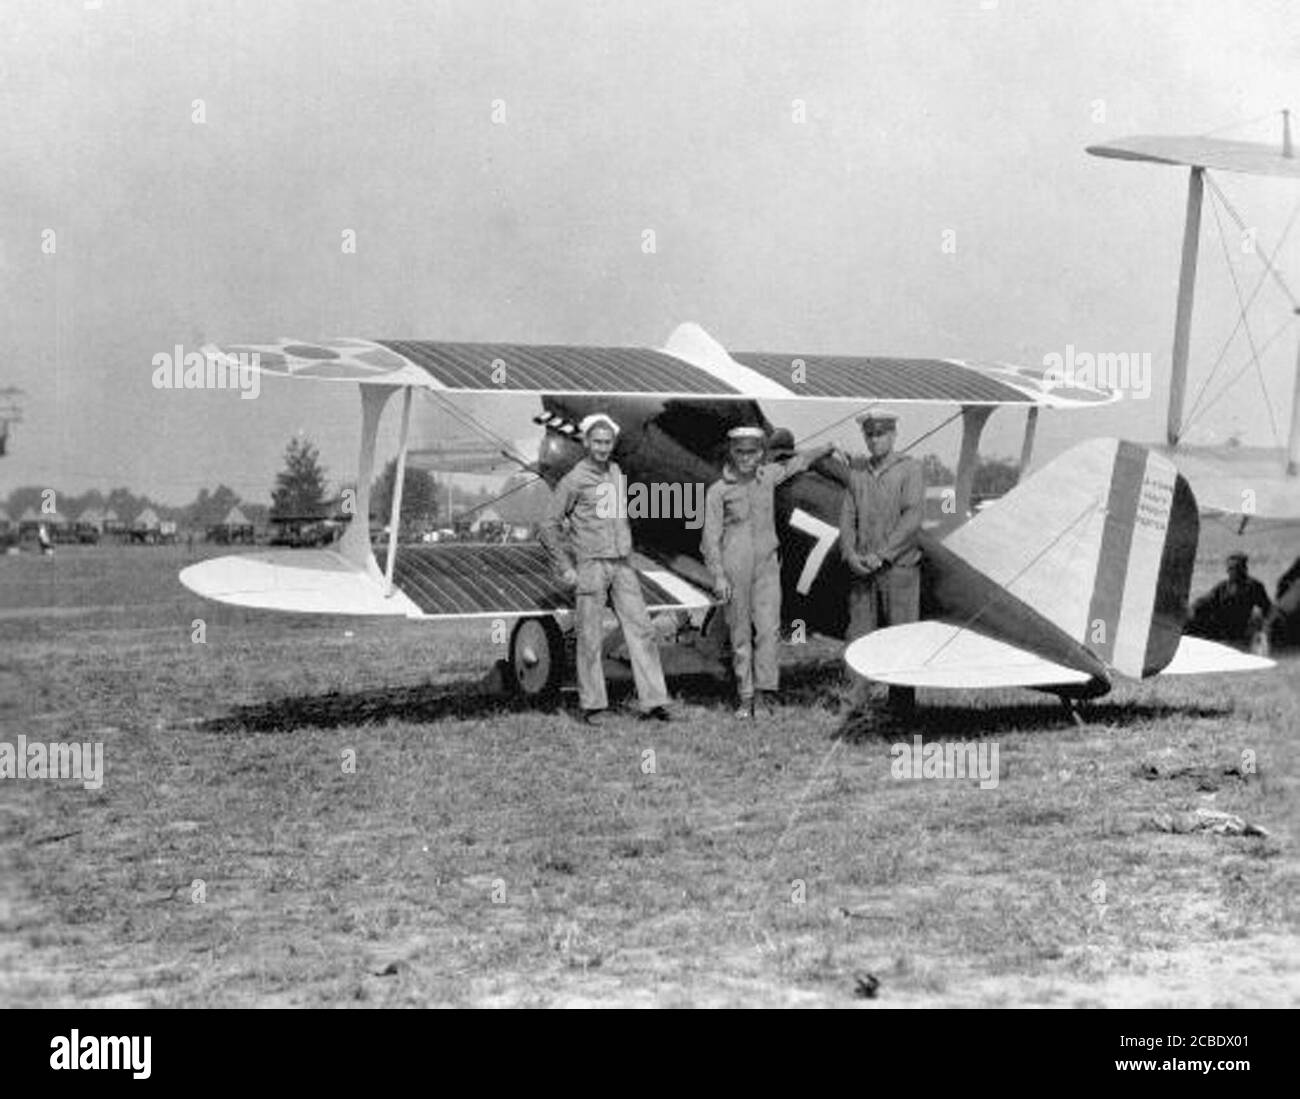 A Wright F2W-1 (Wright fighter) A-6744 at NAS San Diego, circa 1923.  Two of these aircraft were flown at the National Air races at St Louis. These aircraft placed thrid and fourth at the races,.  The Wright Aeronautical Corp racer with regulation fighter model designation. Nort Island collection Stock Photo